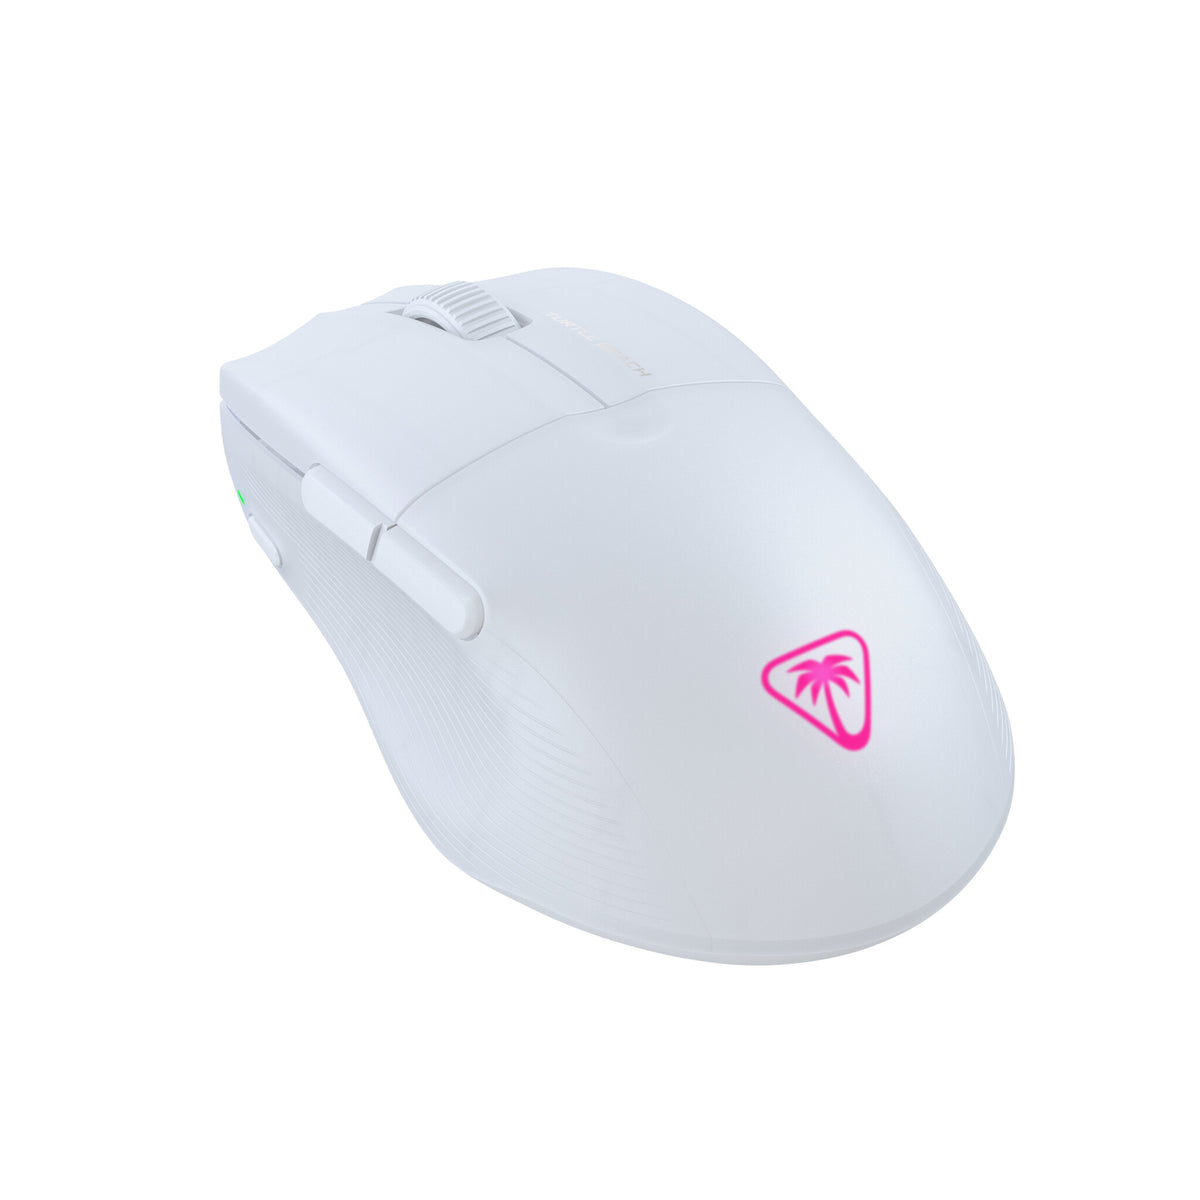 Turtle Beach Pure Air - Ultra-Light RGB Wireless Gaming Mouse in White - 26,000 DPI